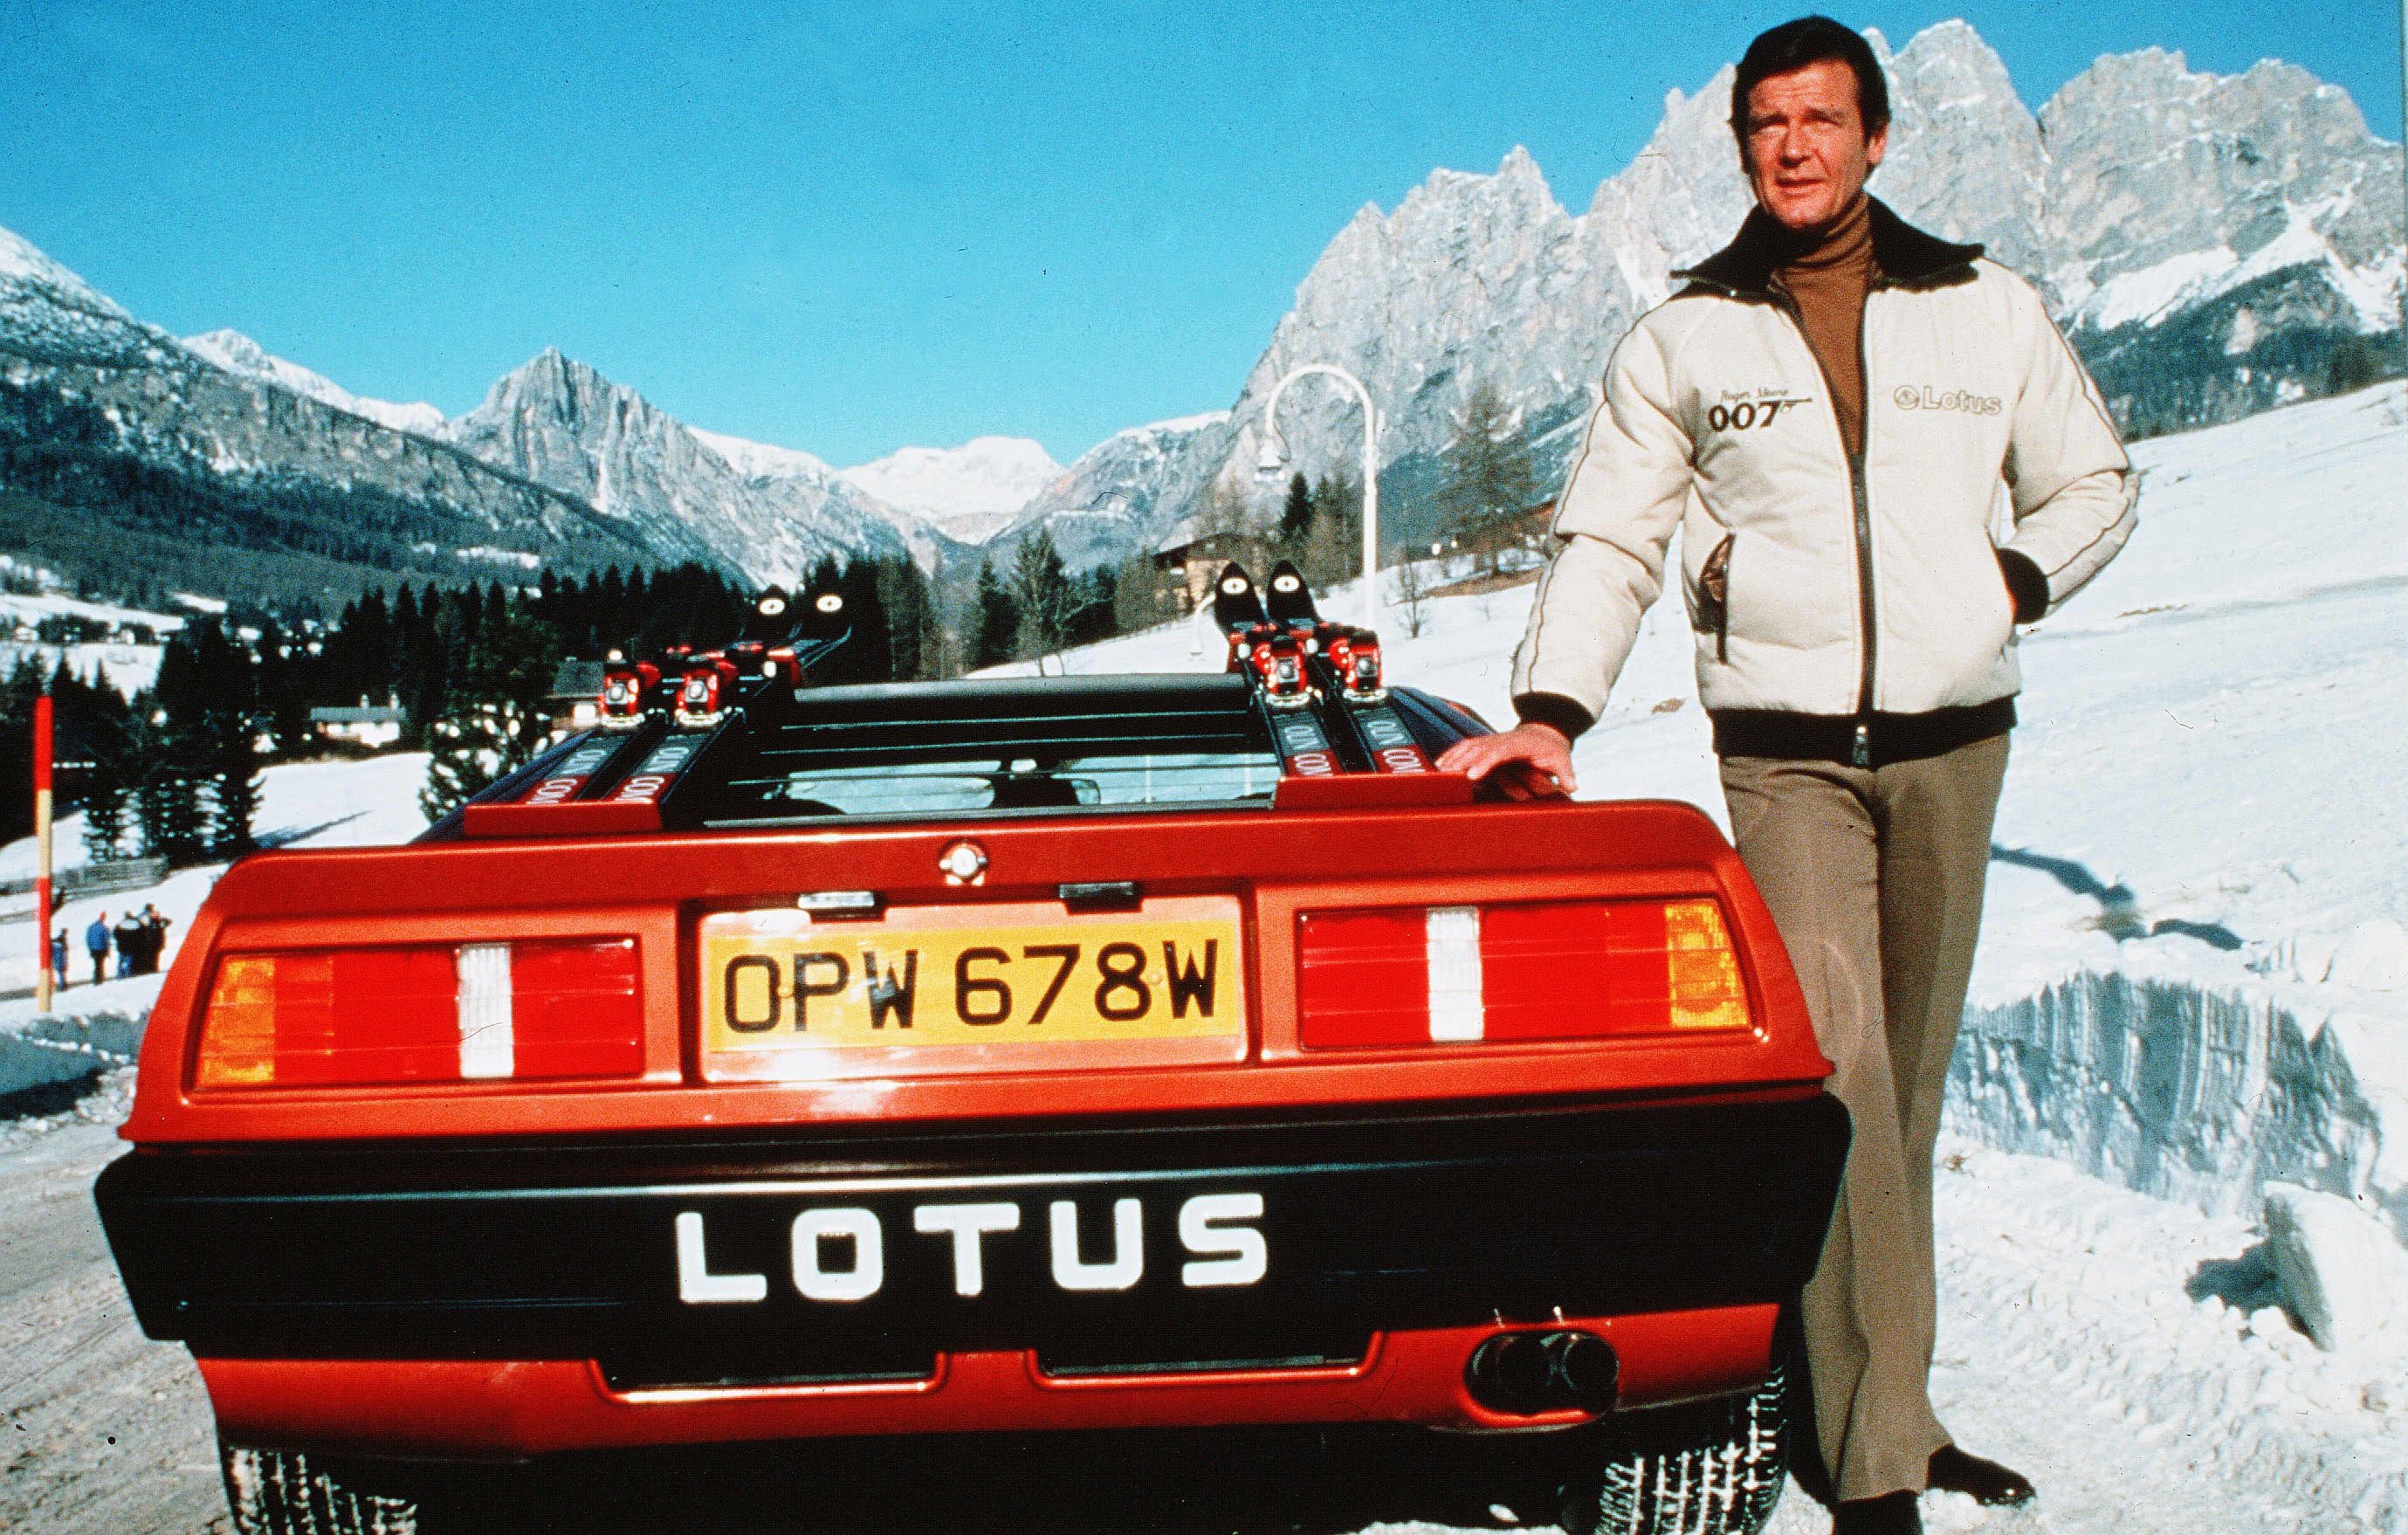 The car is a James Bond style Lotus Esprit, here it is pictured with former Bond actor, Roger Moore